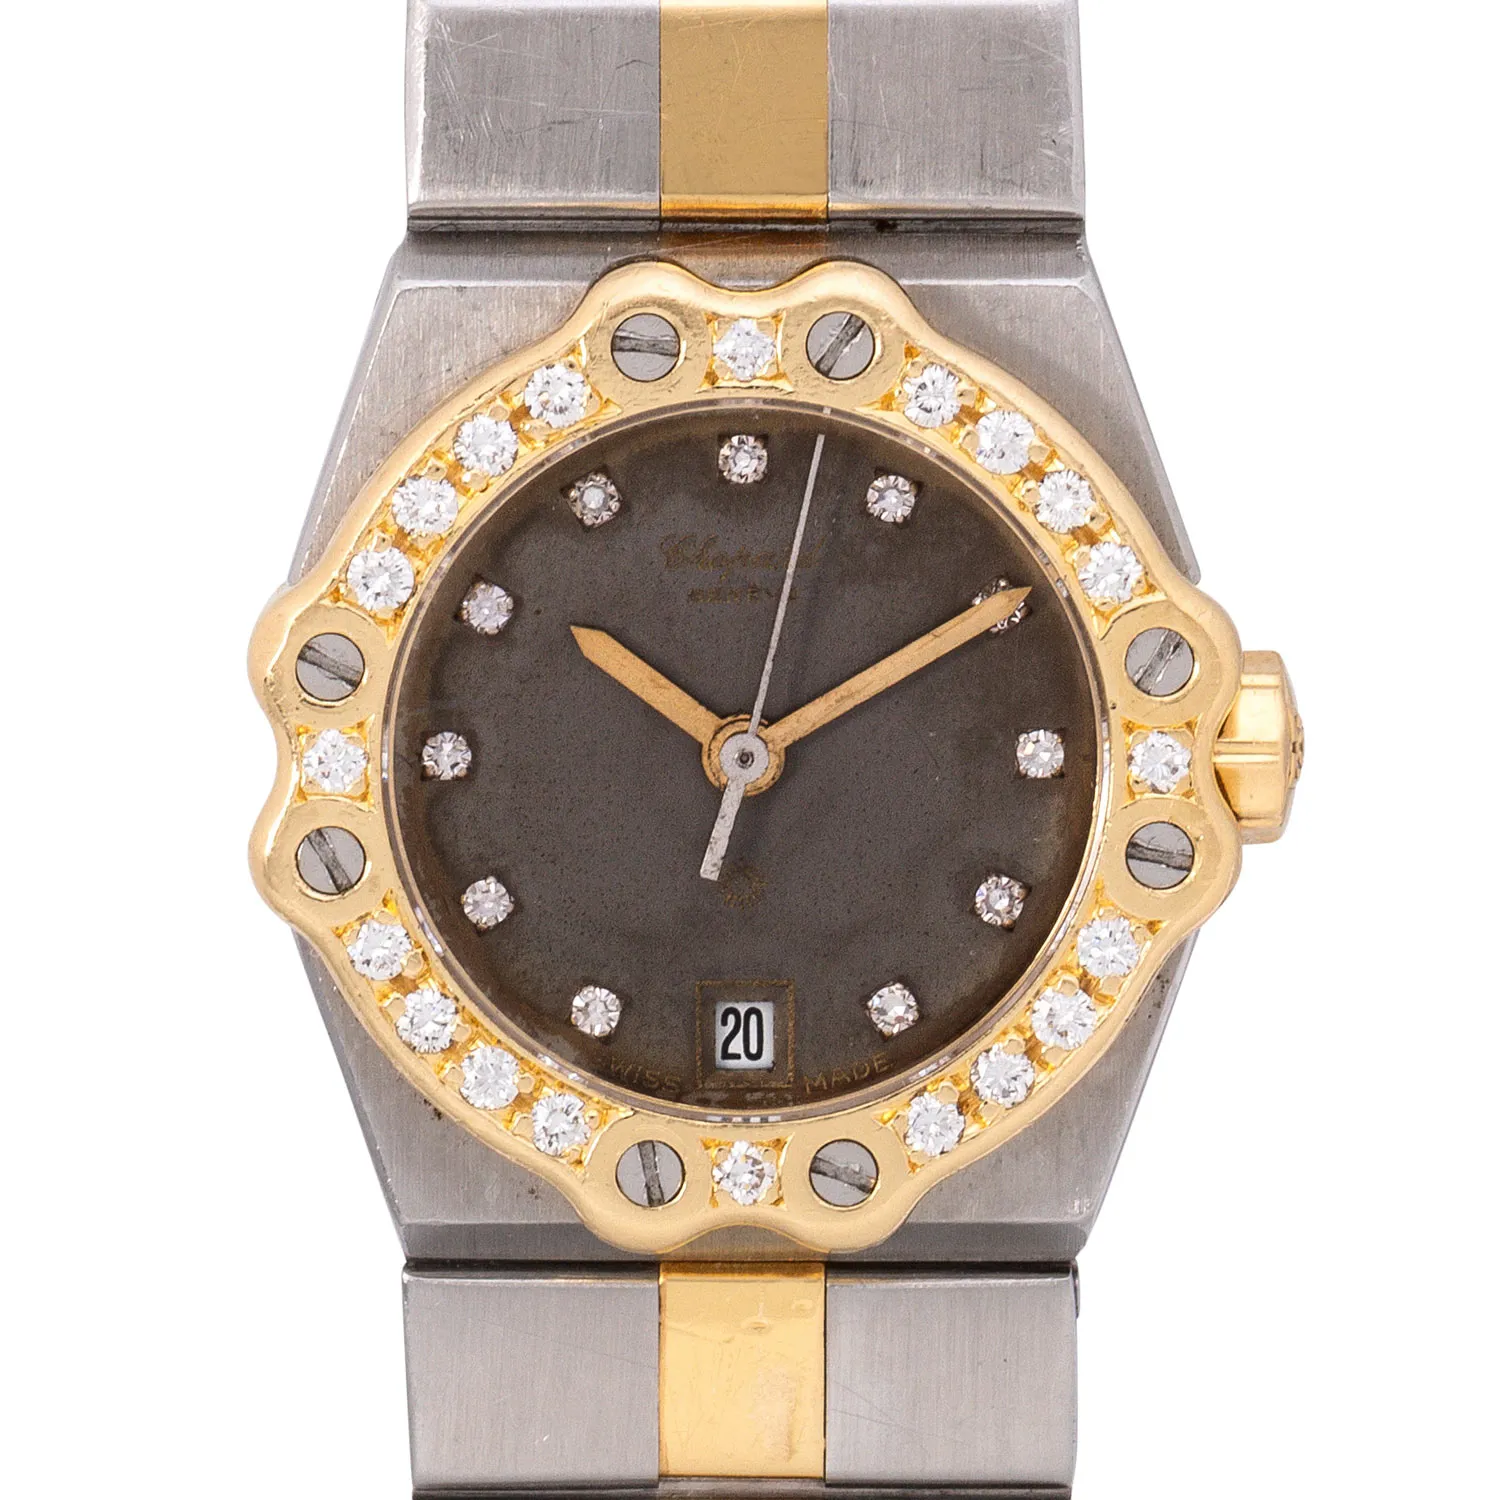 Chopard St. Moritz 8024 24mm Yellow gold, stainless steel and diamond-set